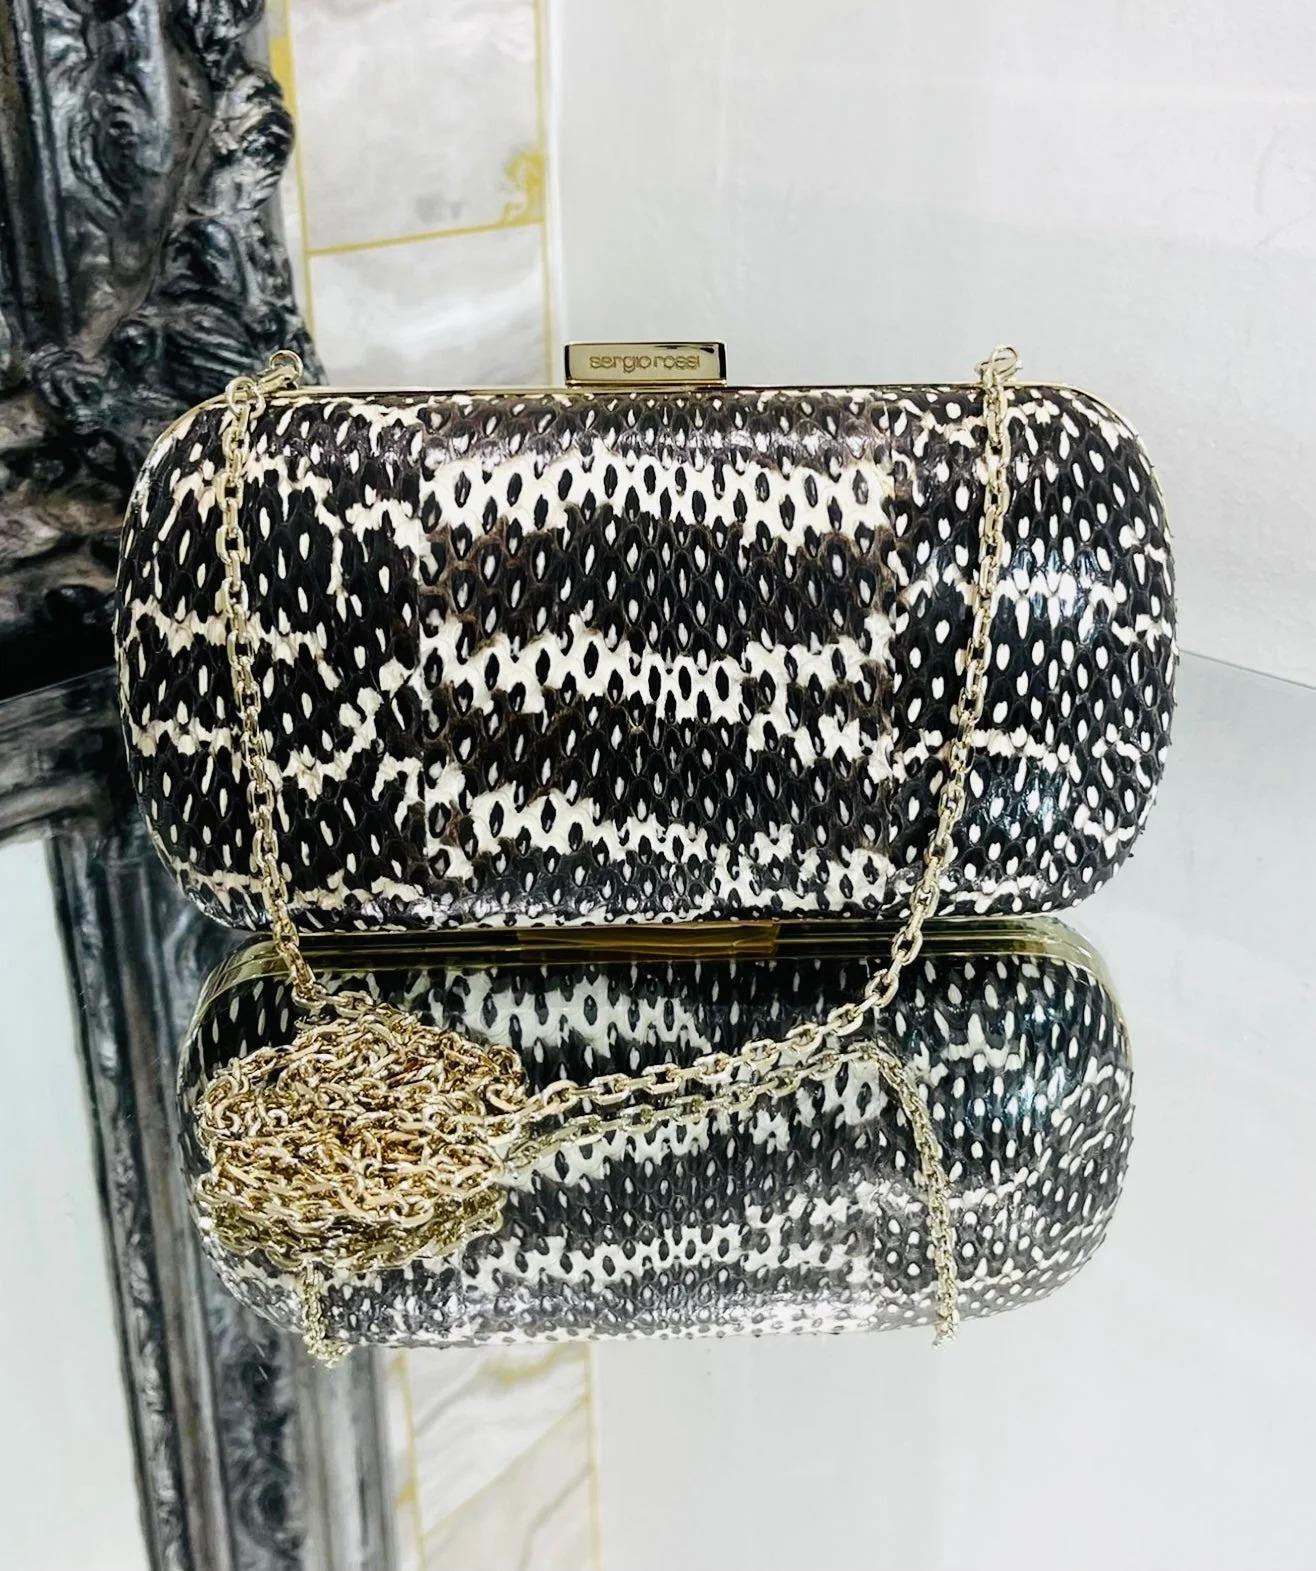 Sergio Rossi Lizard Skin Clutch Bag With Chain

Hard case bag in black and white exotic skin, gold hardware and chain strap. Logo engraved closure.

Additional information:
Size – 20 W x 5 D x 10 H cm
Composition – Lizard Skin 
Condition – Very